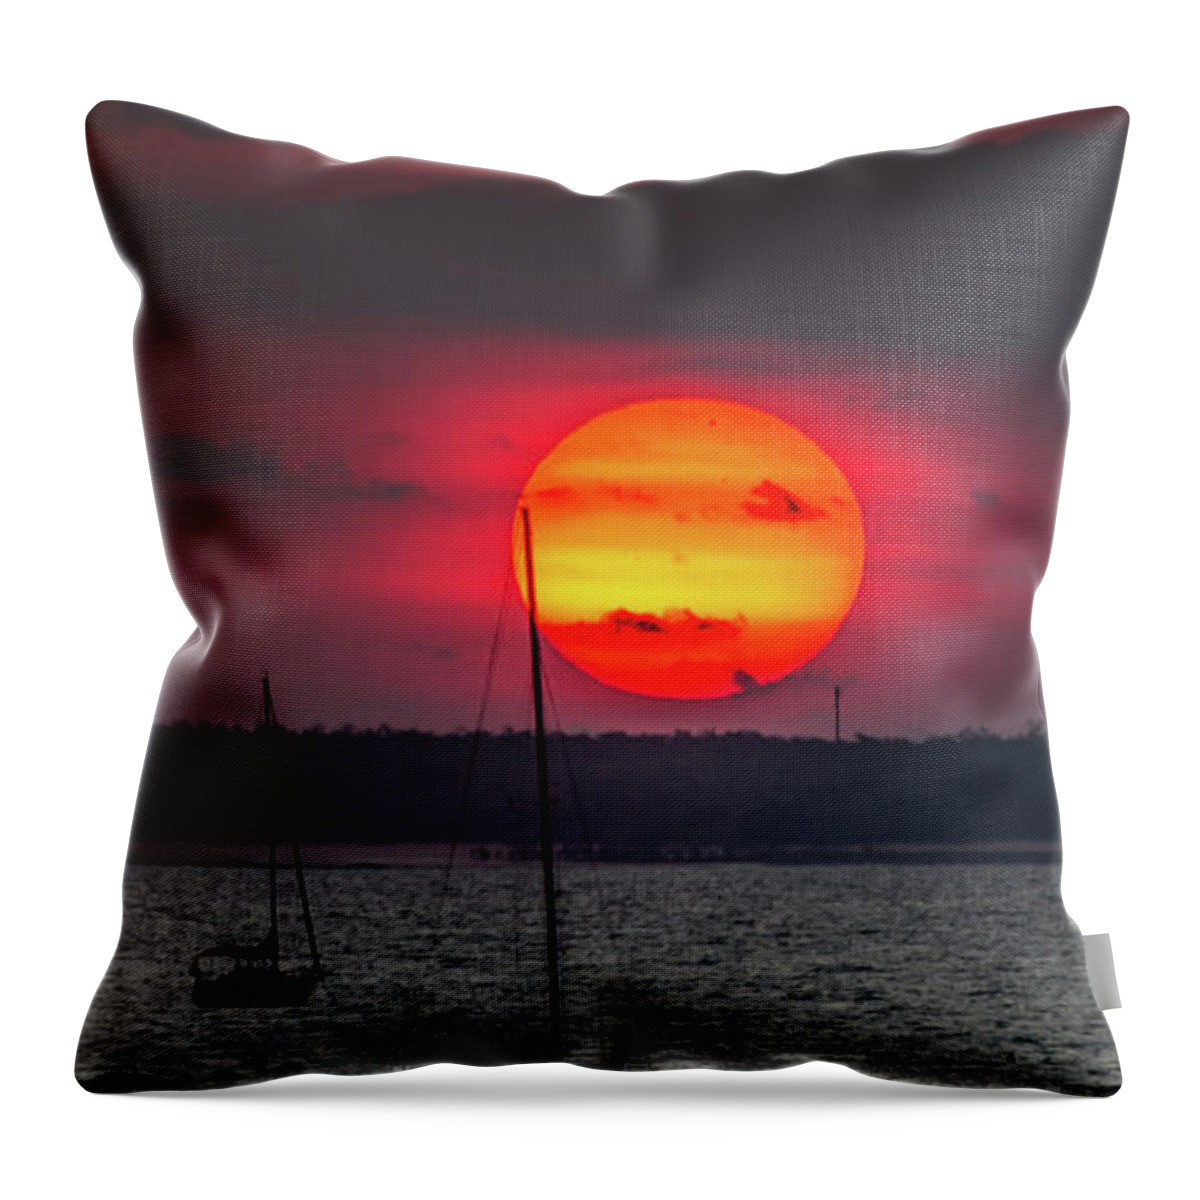 Scenics Throw Pillow featuring the photograph Big Sun Over Fannie Bay, Nt by Nolan Caldwell